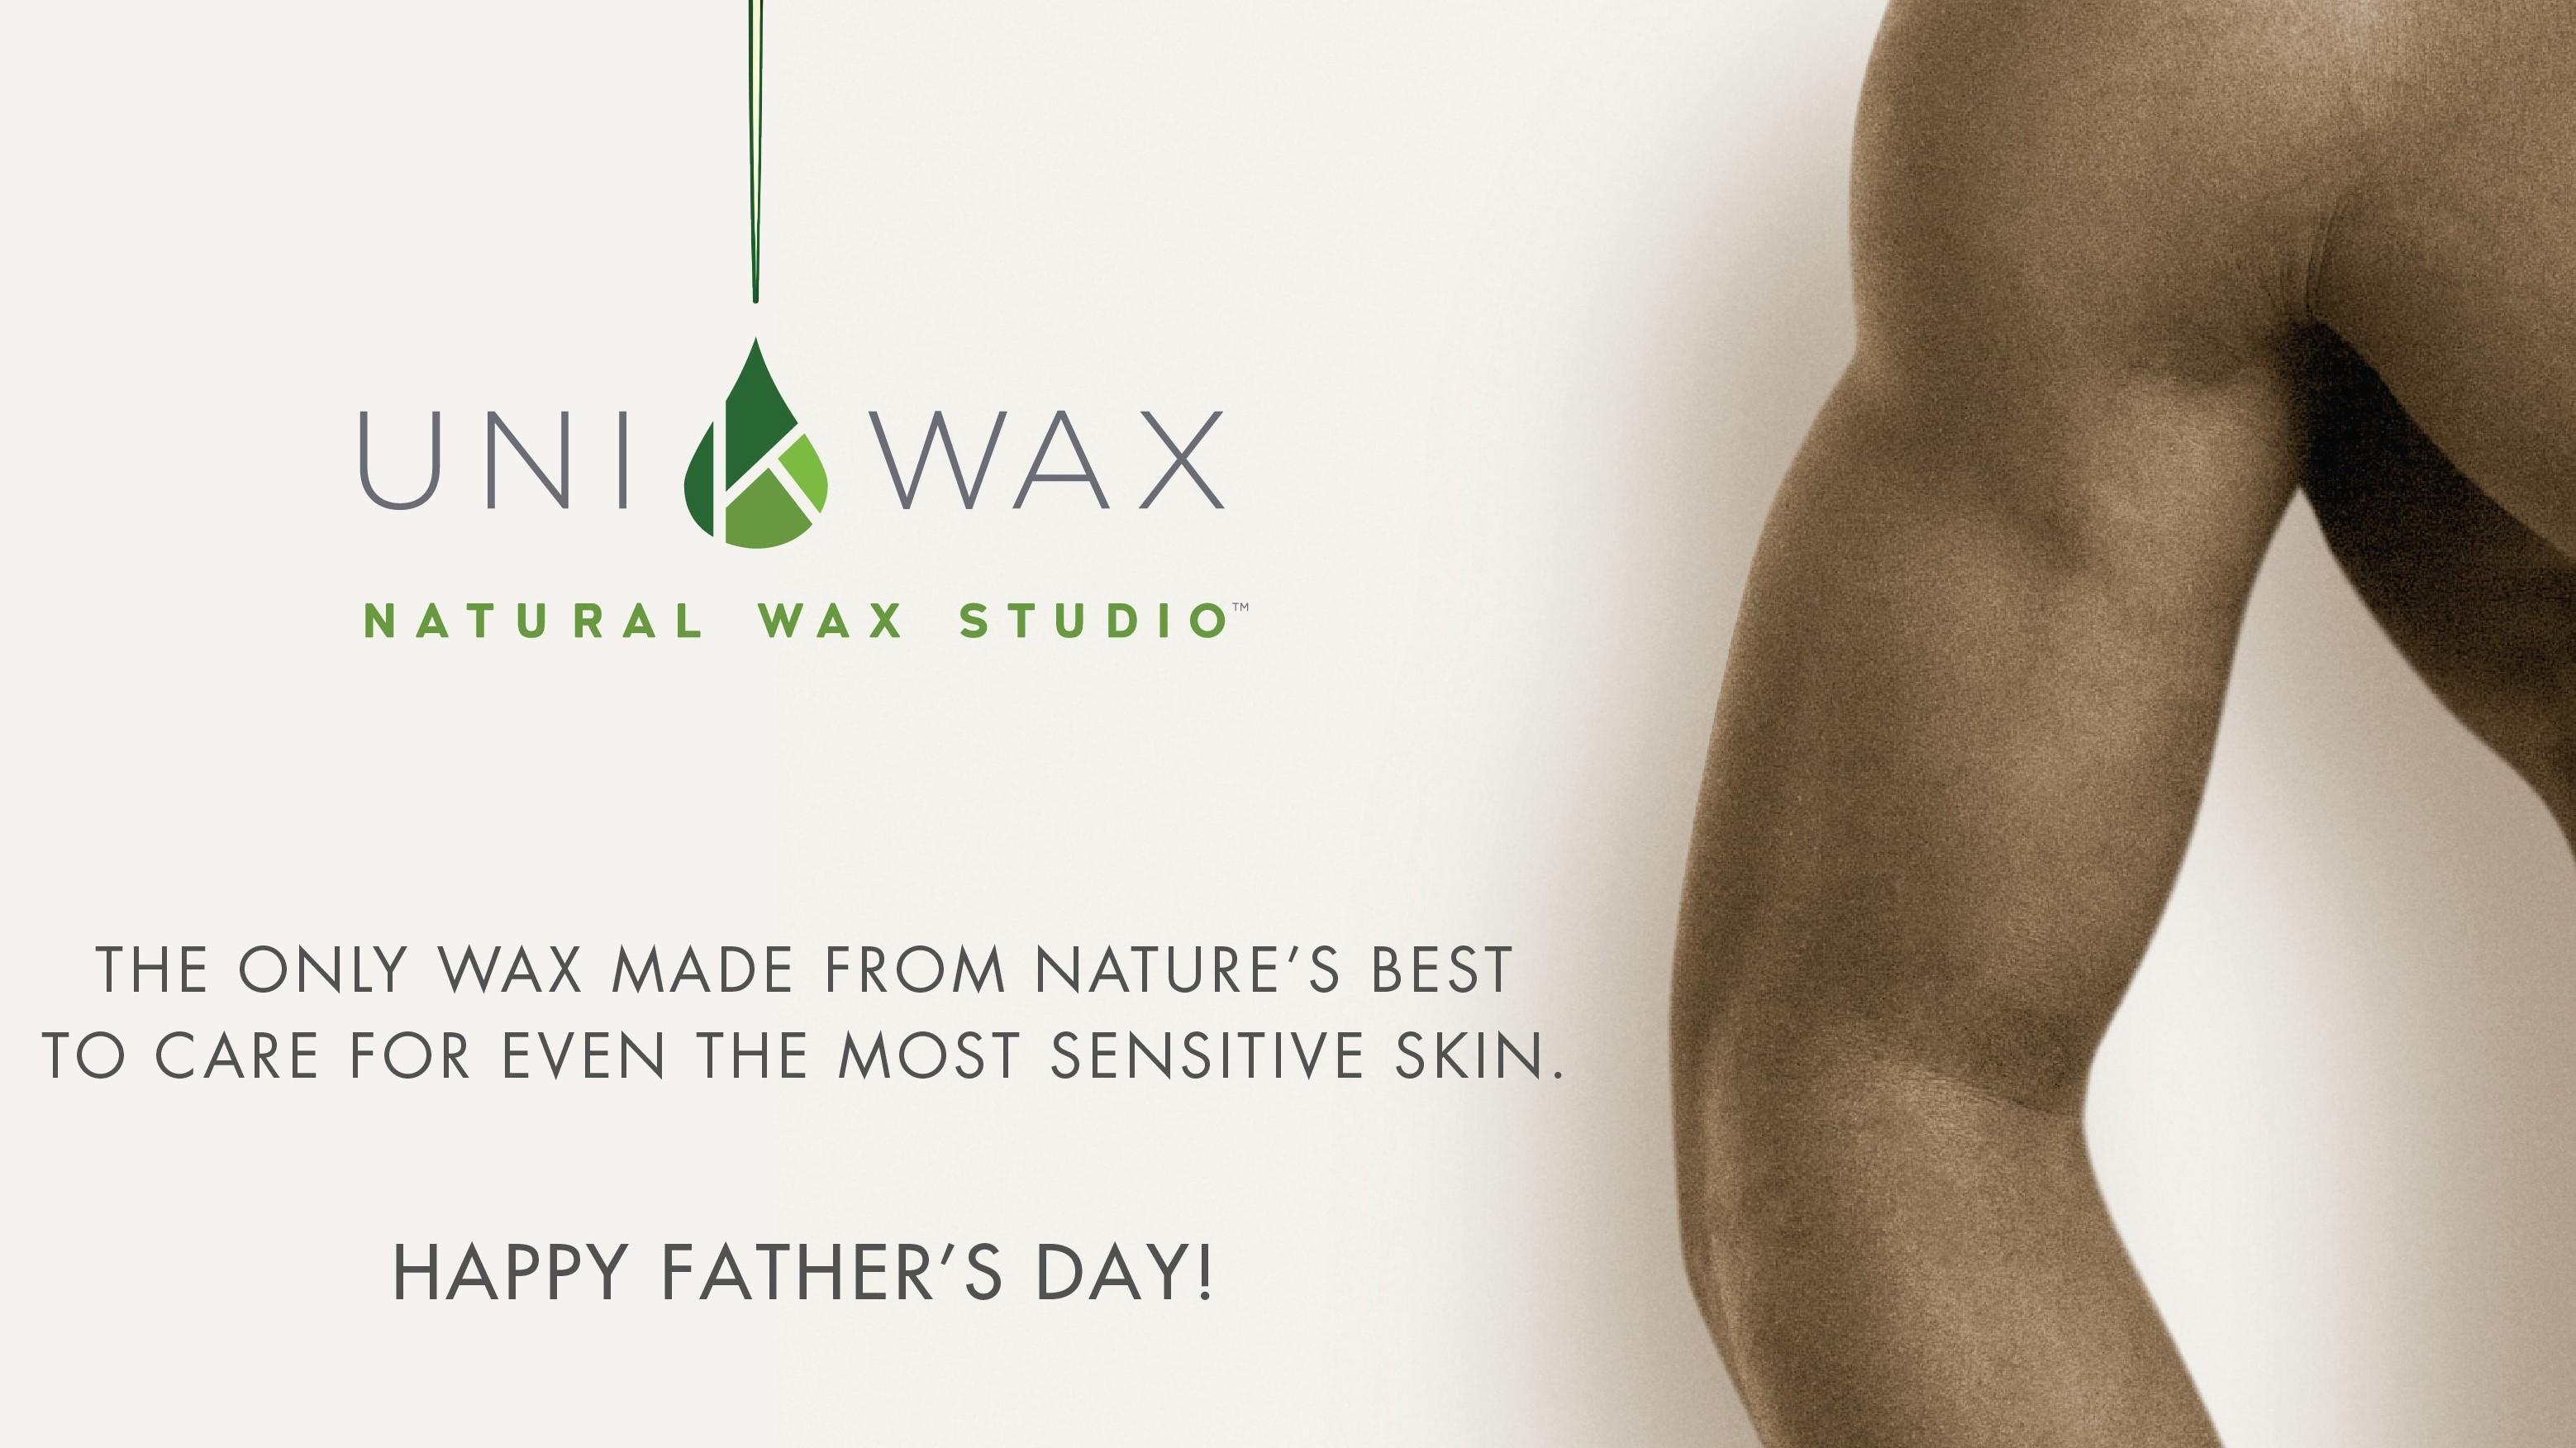 Uni K Wax Studio Coupons near me in Kissimmee | 8coupons